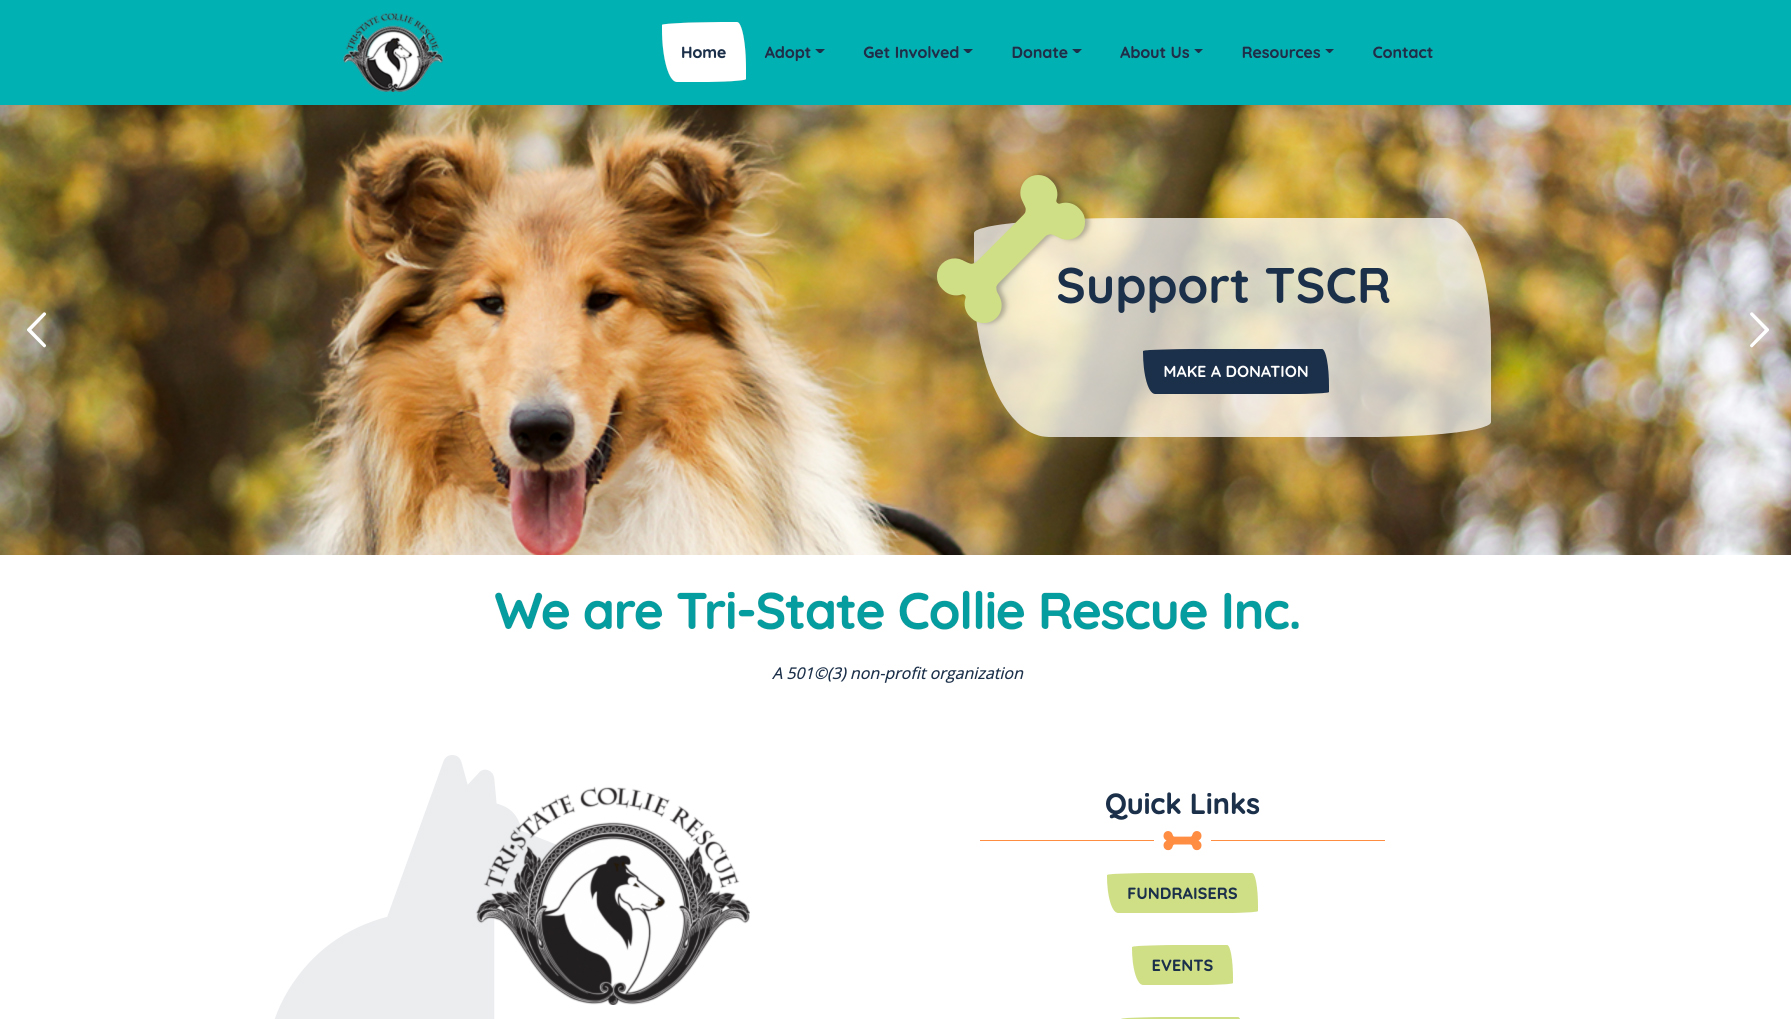 Website design for Tri-State Collie Rescue. Designed by Sitka Creations.